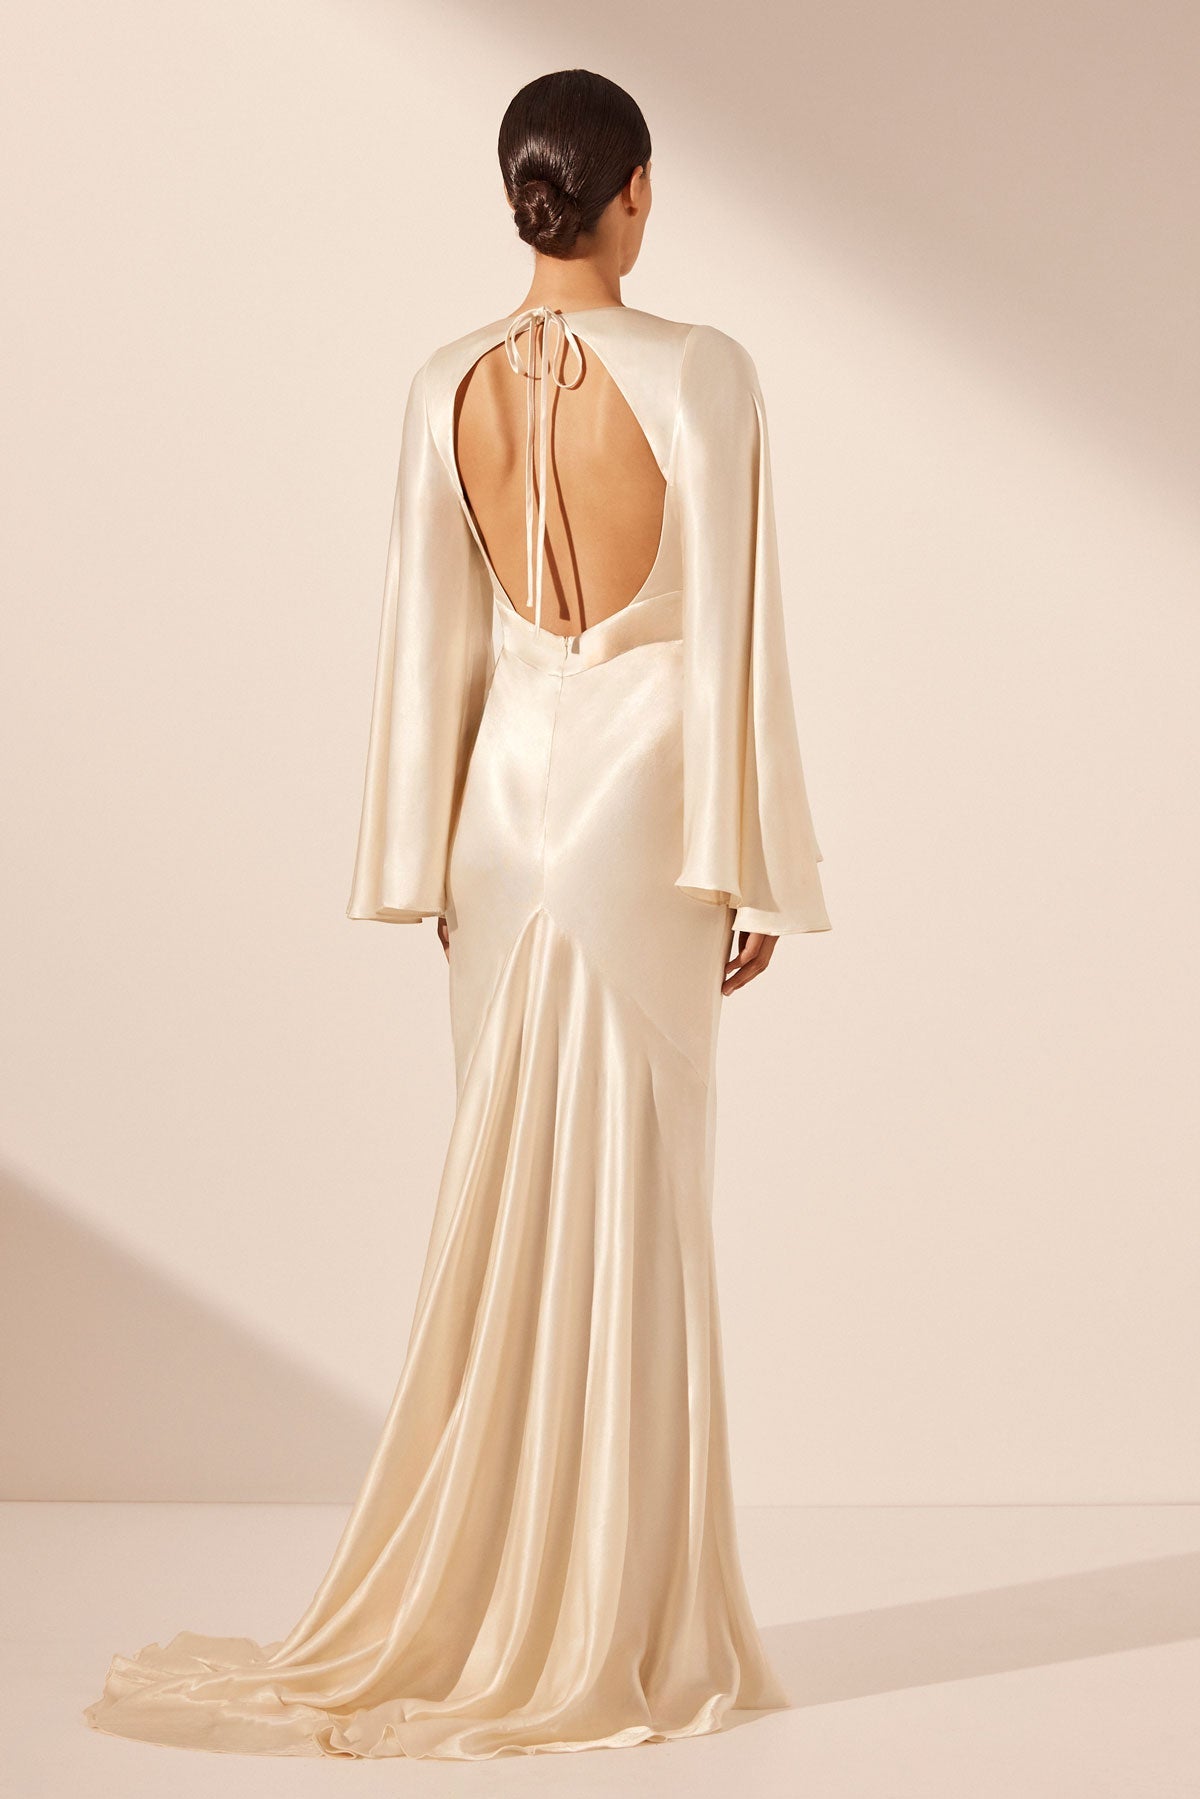 Simple Chiffon Beach Wedding Dresses Backless Wedding Gown With Lace DTW297  – DressTok.co.uk